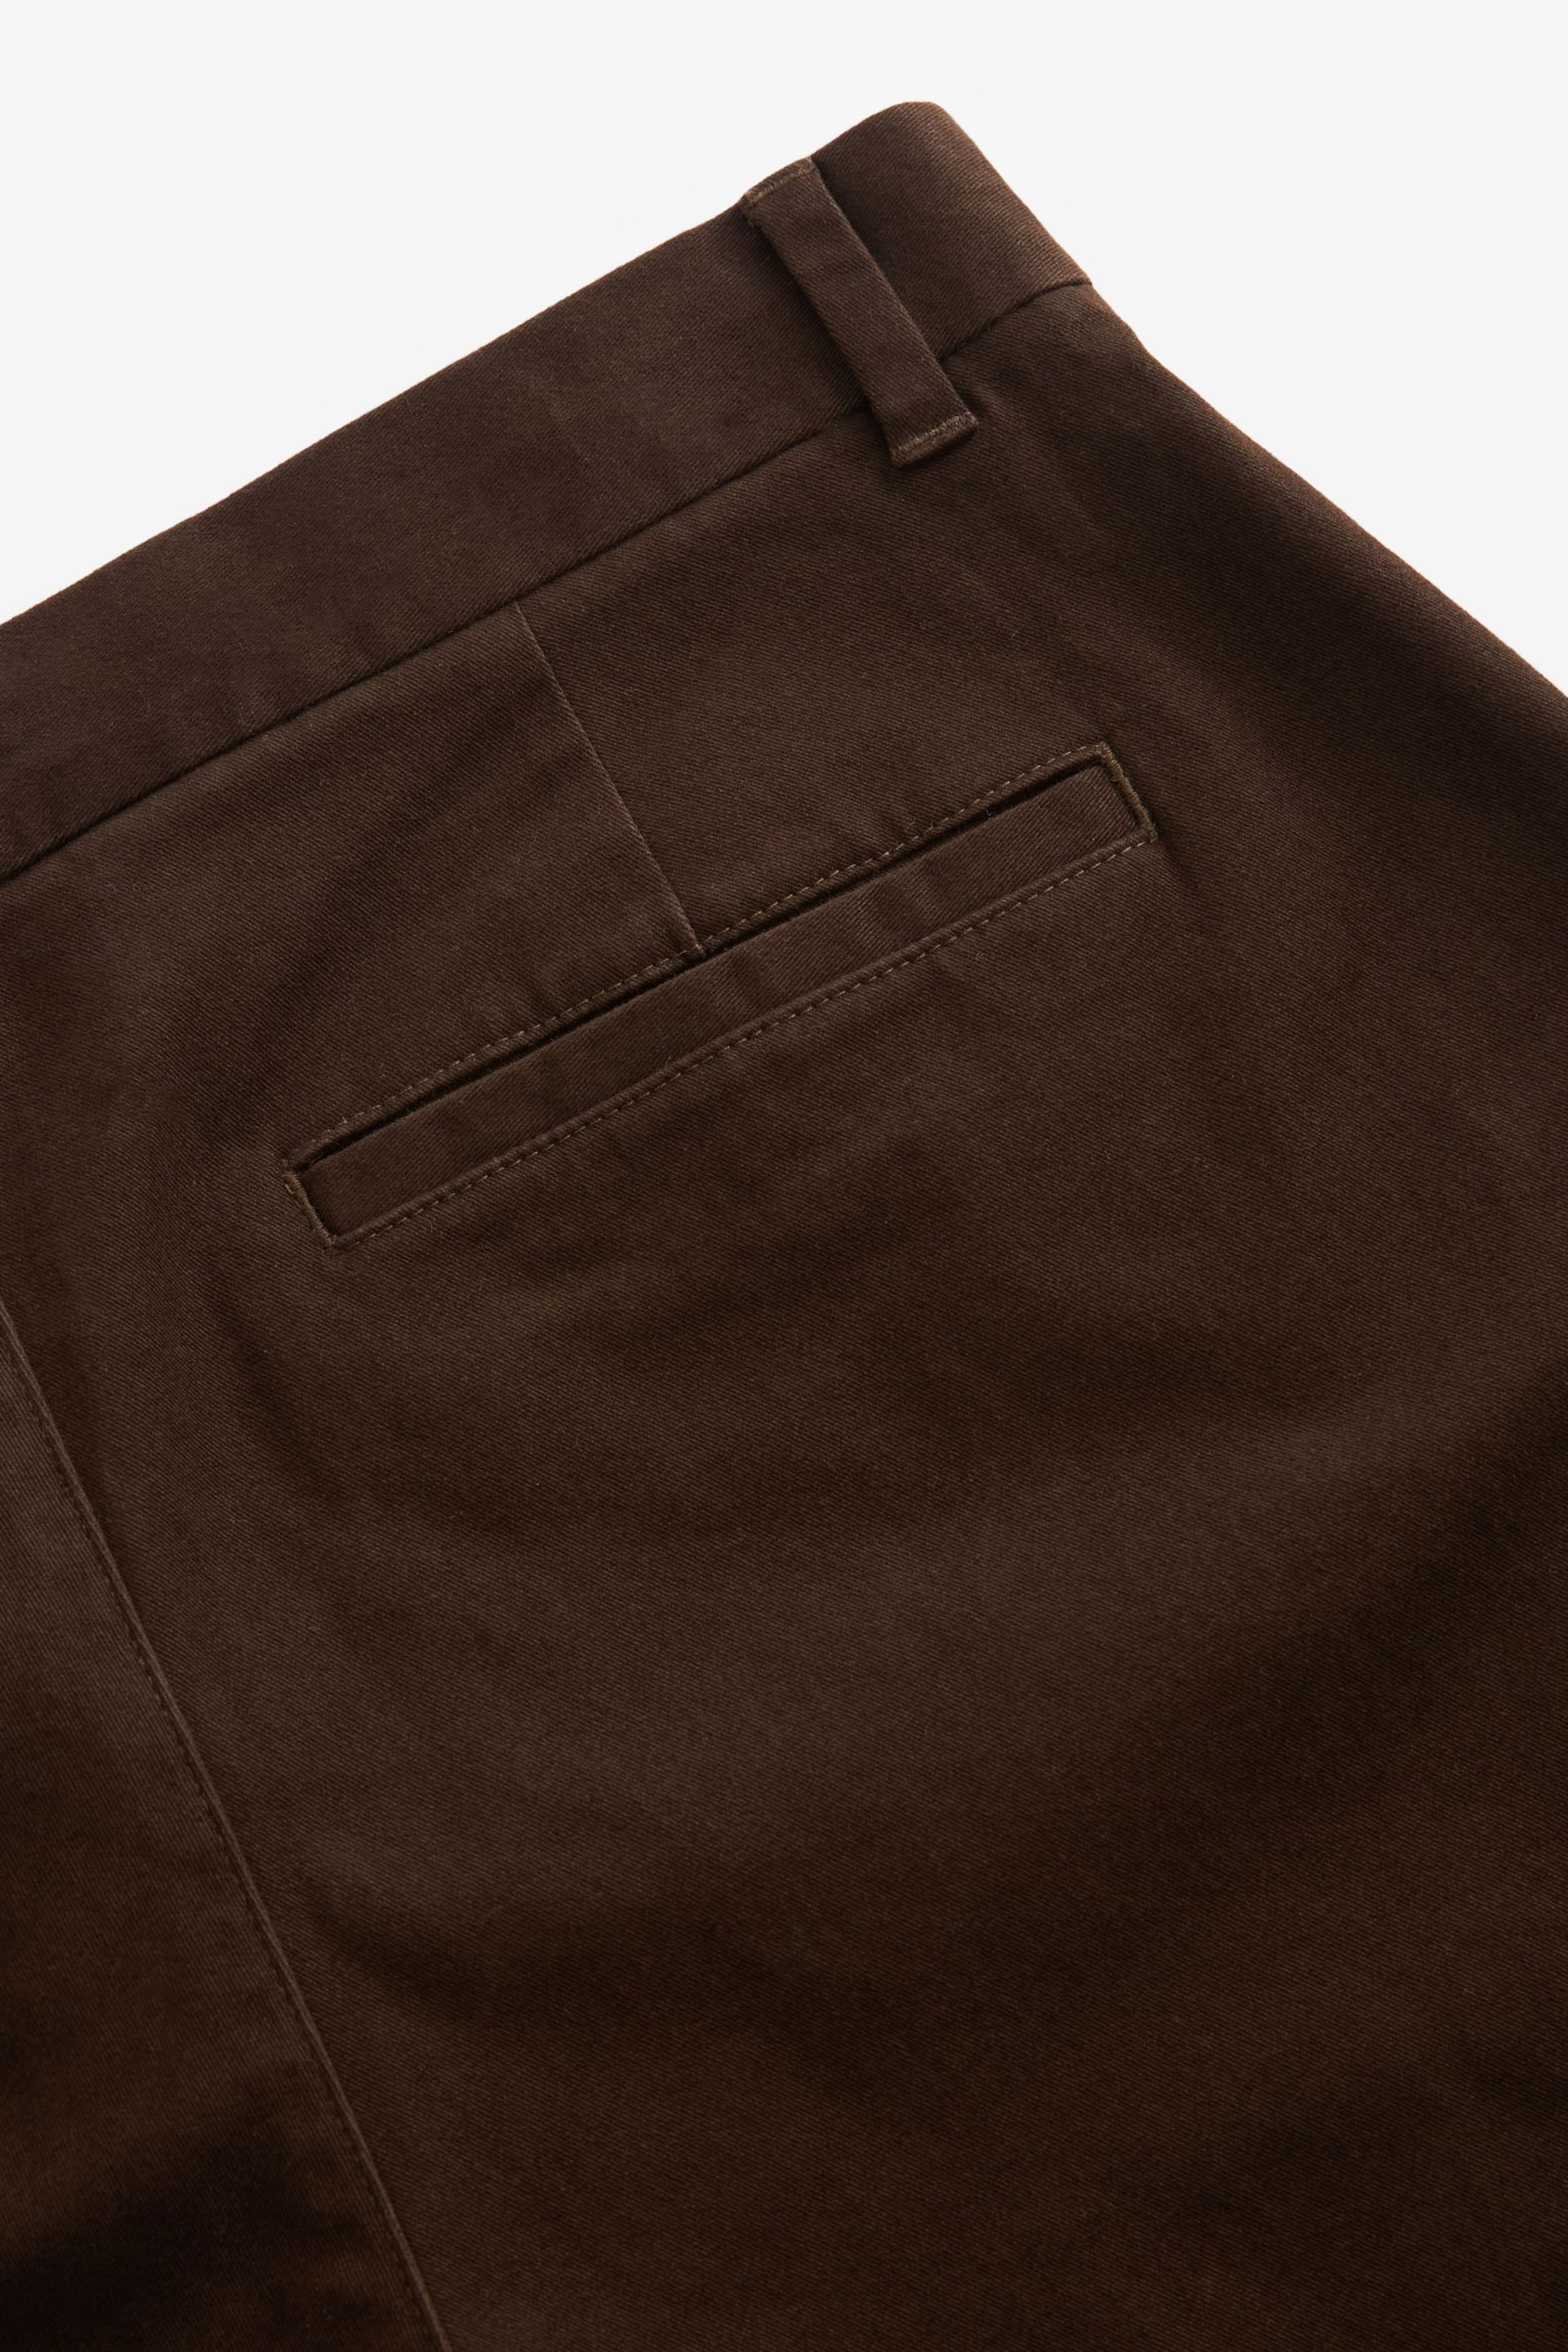 Chocolate Brown Slim Stretch Chino Trousers - Image 7 of 8